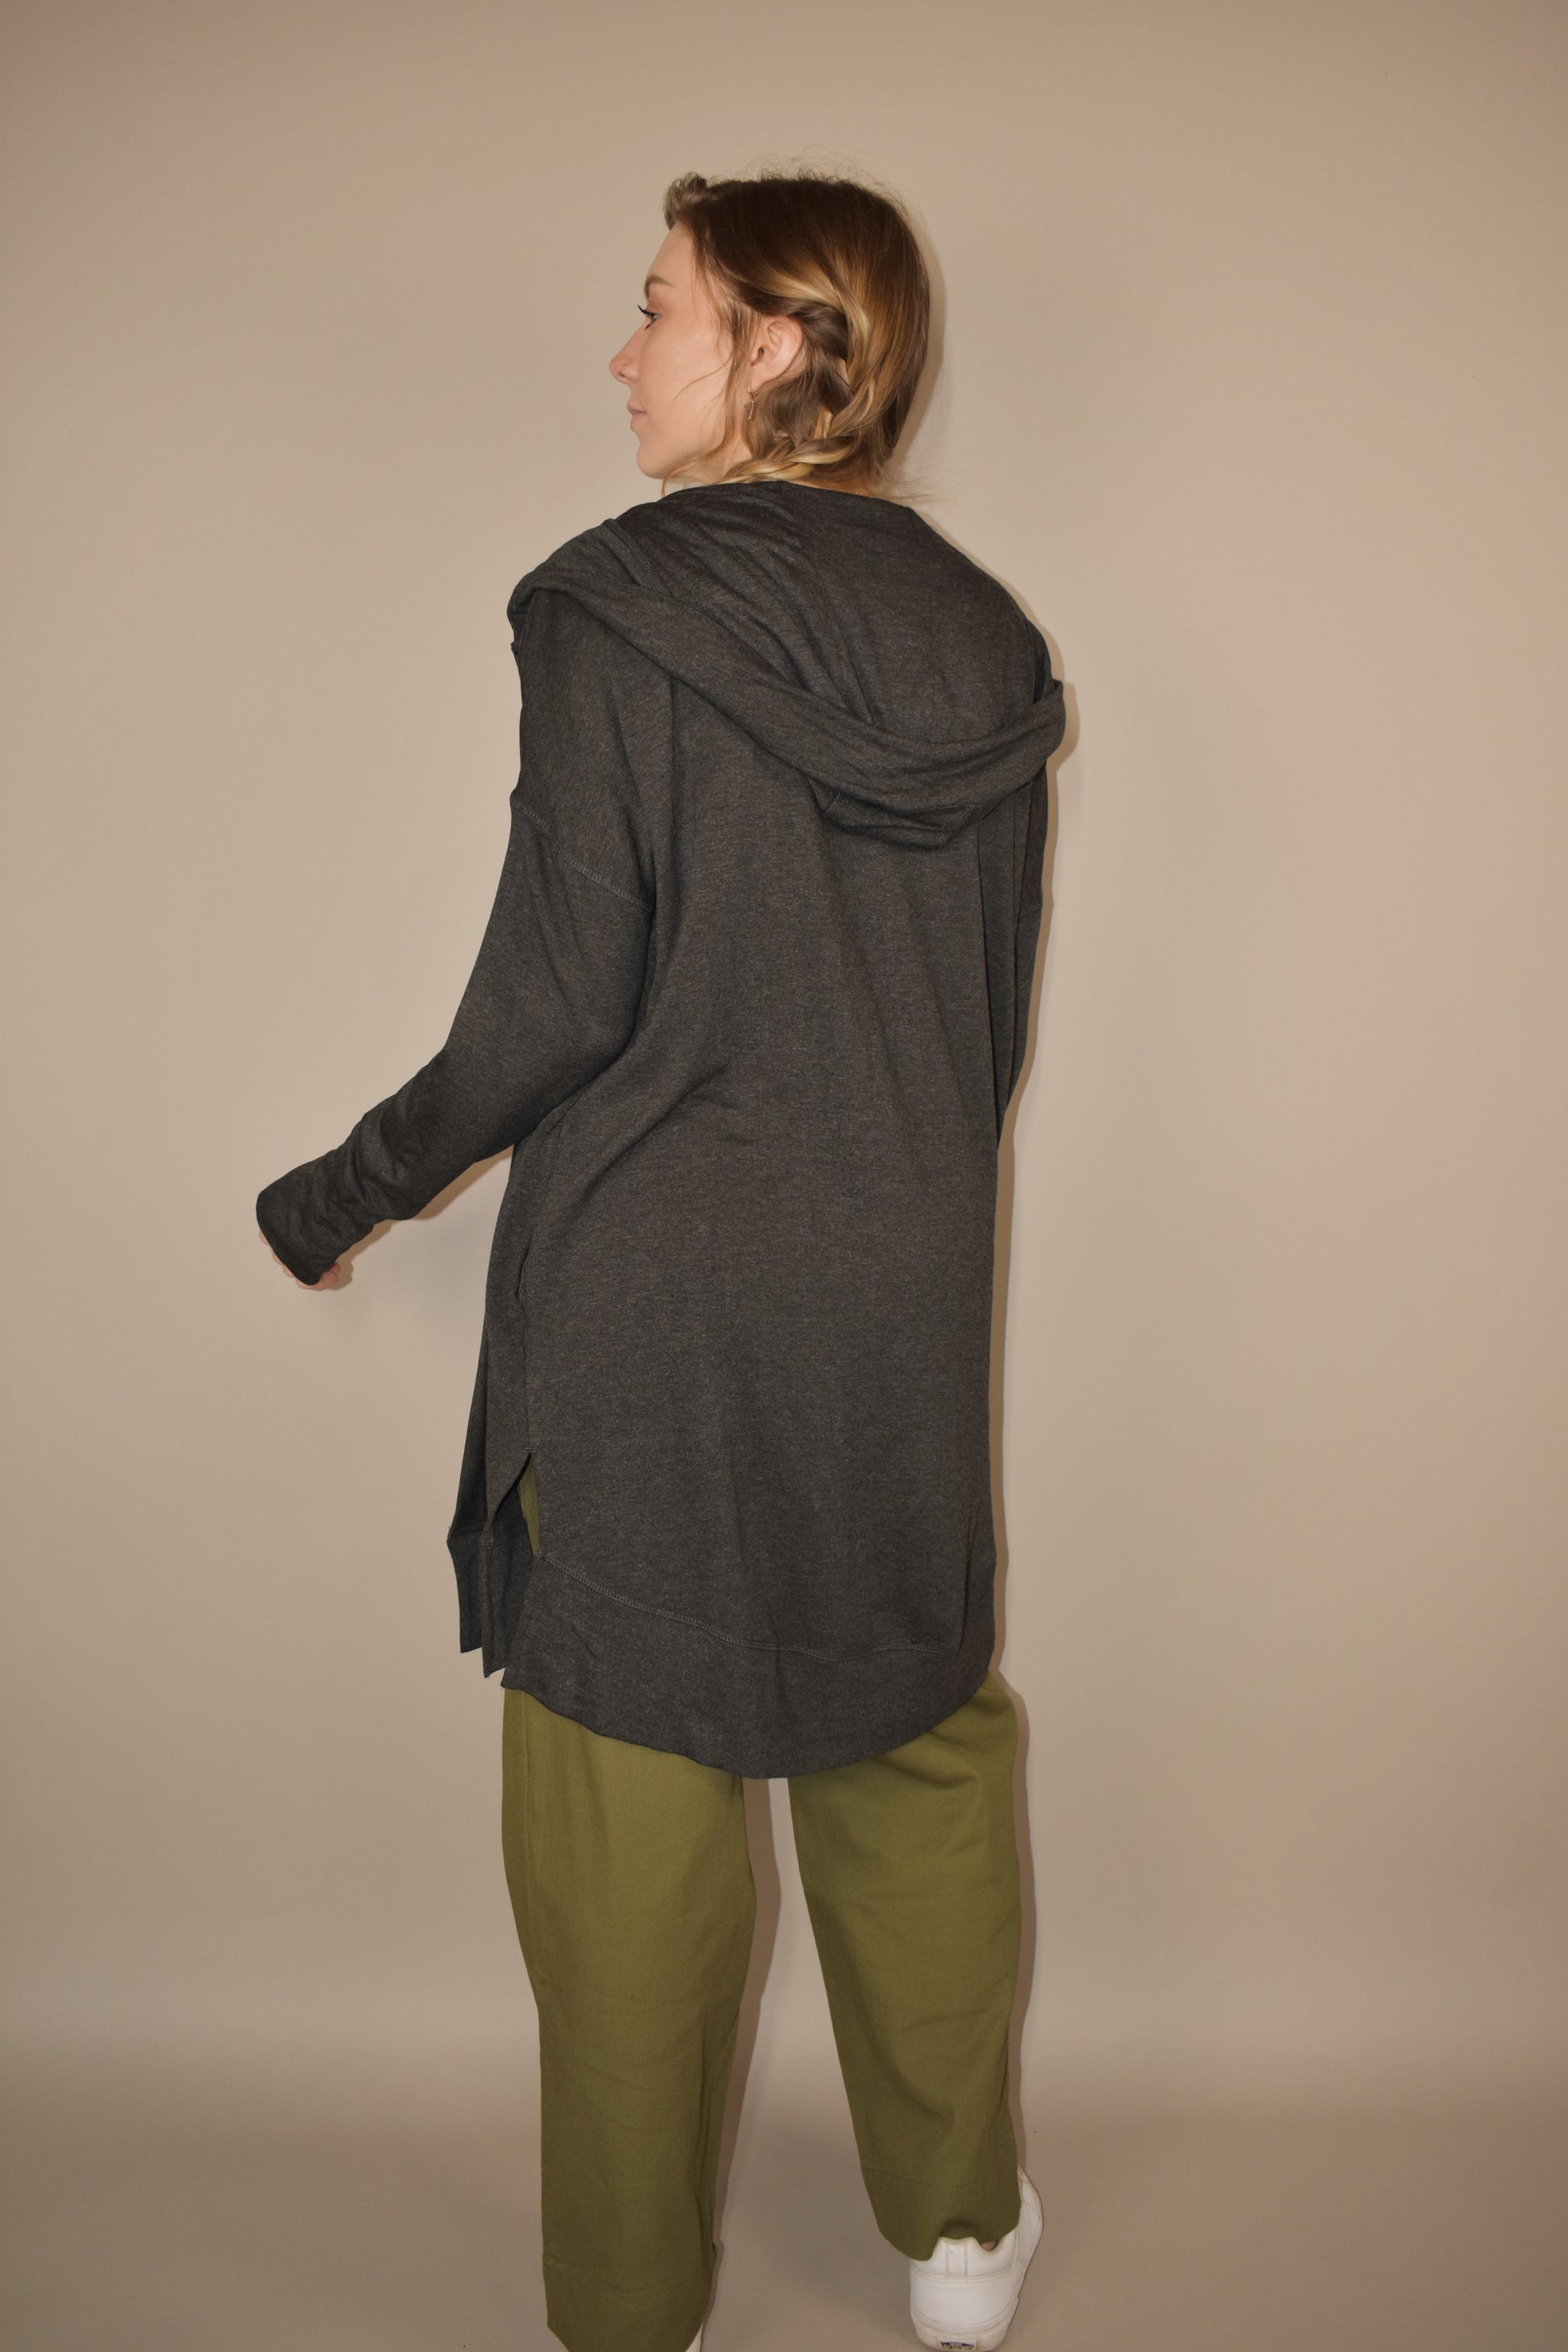 super soft cardigan with pockets and hood. mid thigh length. athletic stretchy material